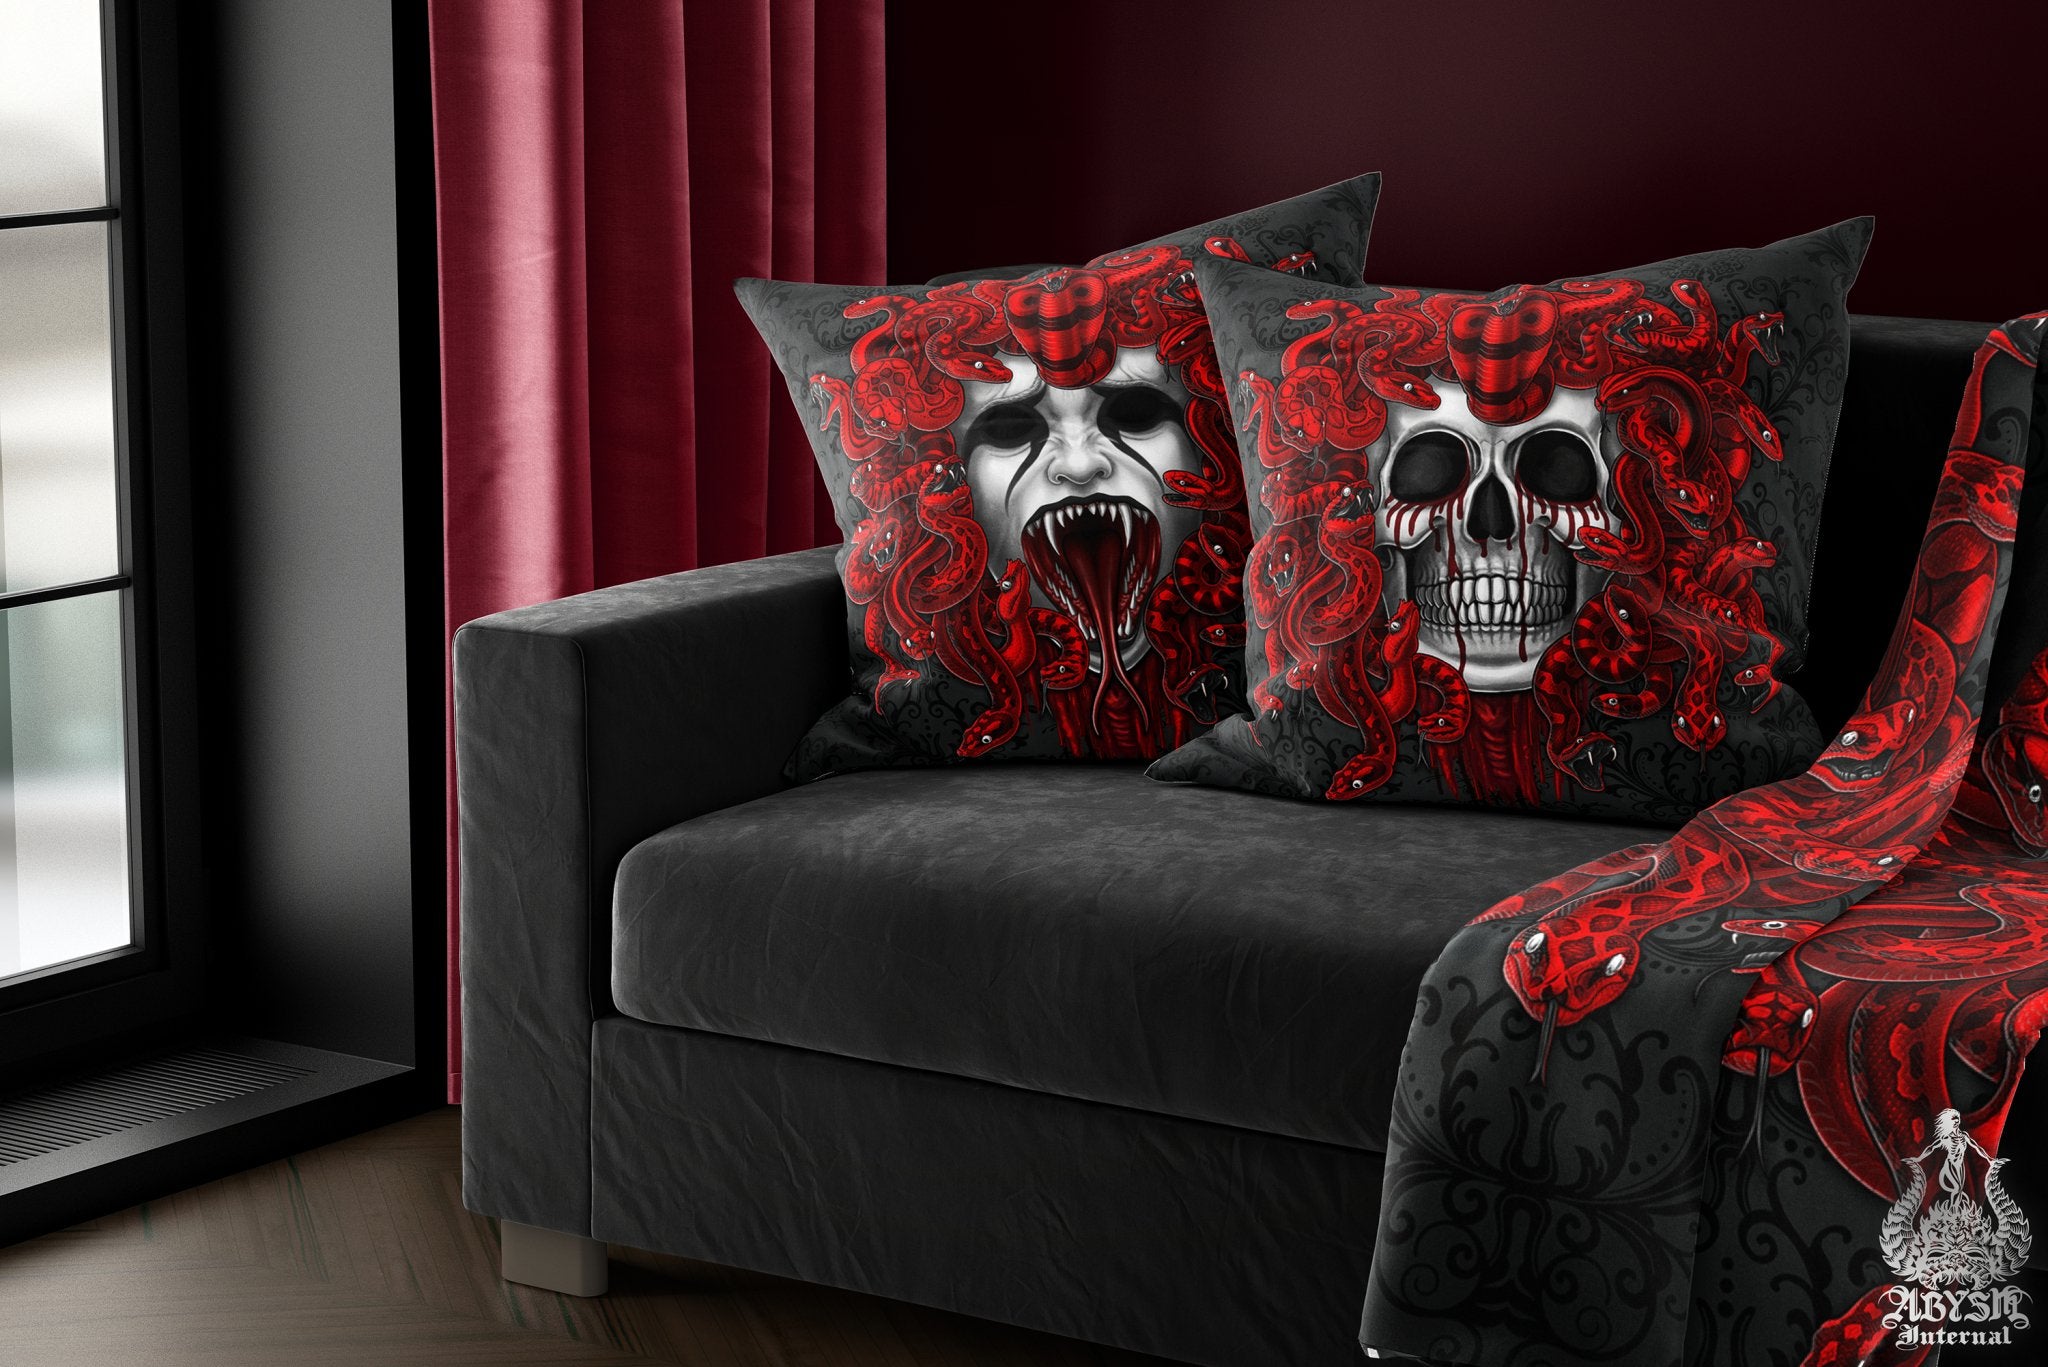 Skull Throw Pillow, Decorative Accent Pillow, Square Cushion Cover, Medusa, Nu Goth Black Room Decor, Macabre Art, Alternative Home - Gothic, 2 Faces, 3 Colors - Abysm Internal